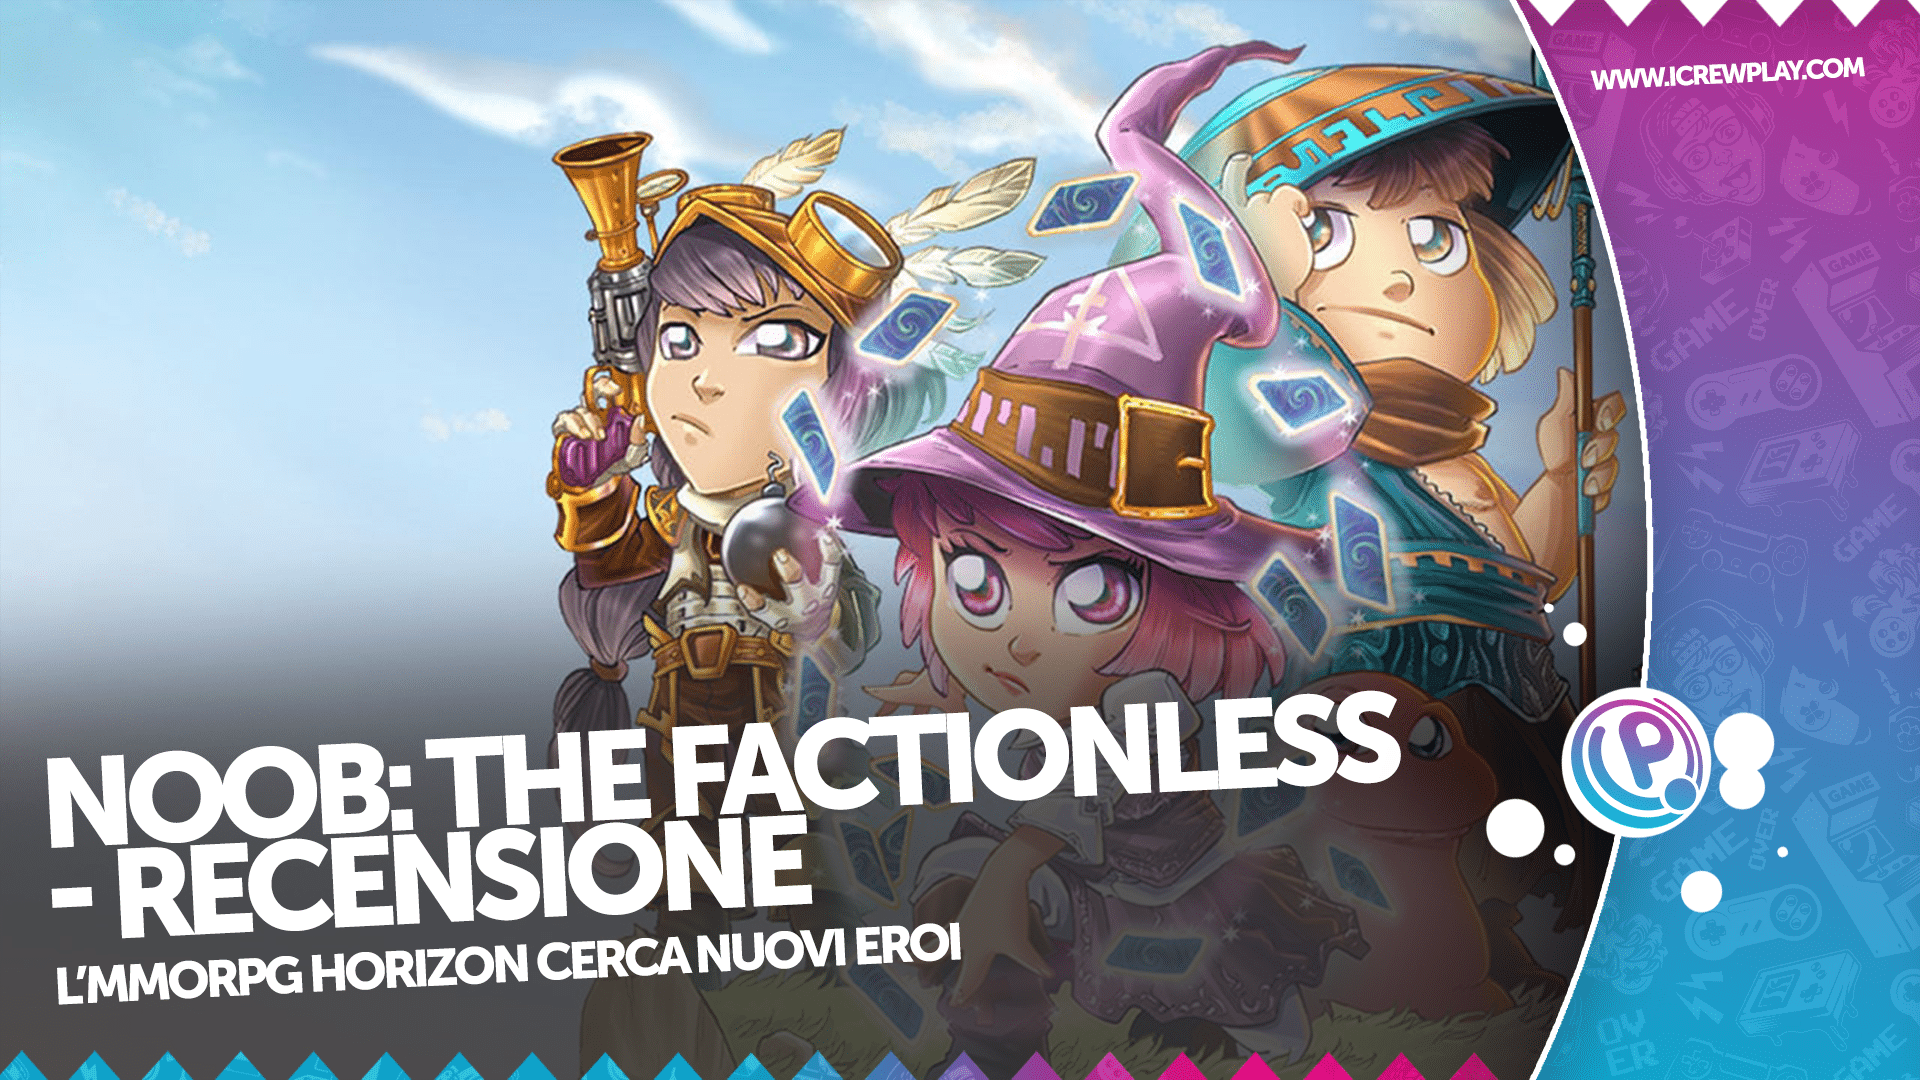 Noob: The Factionless recensione